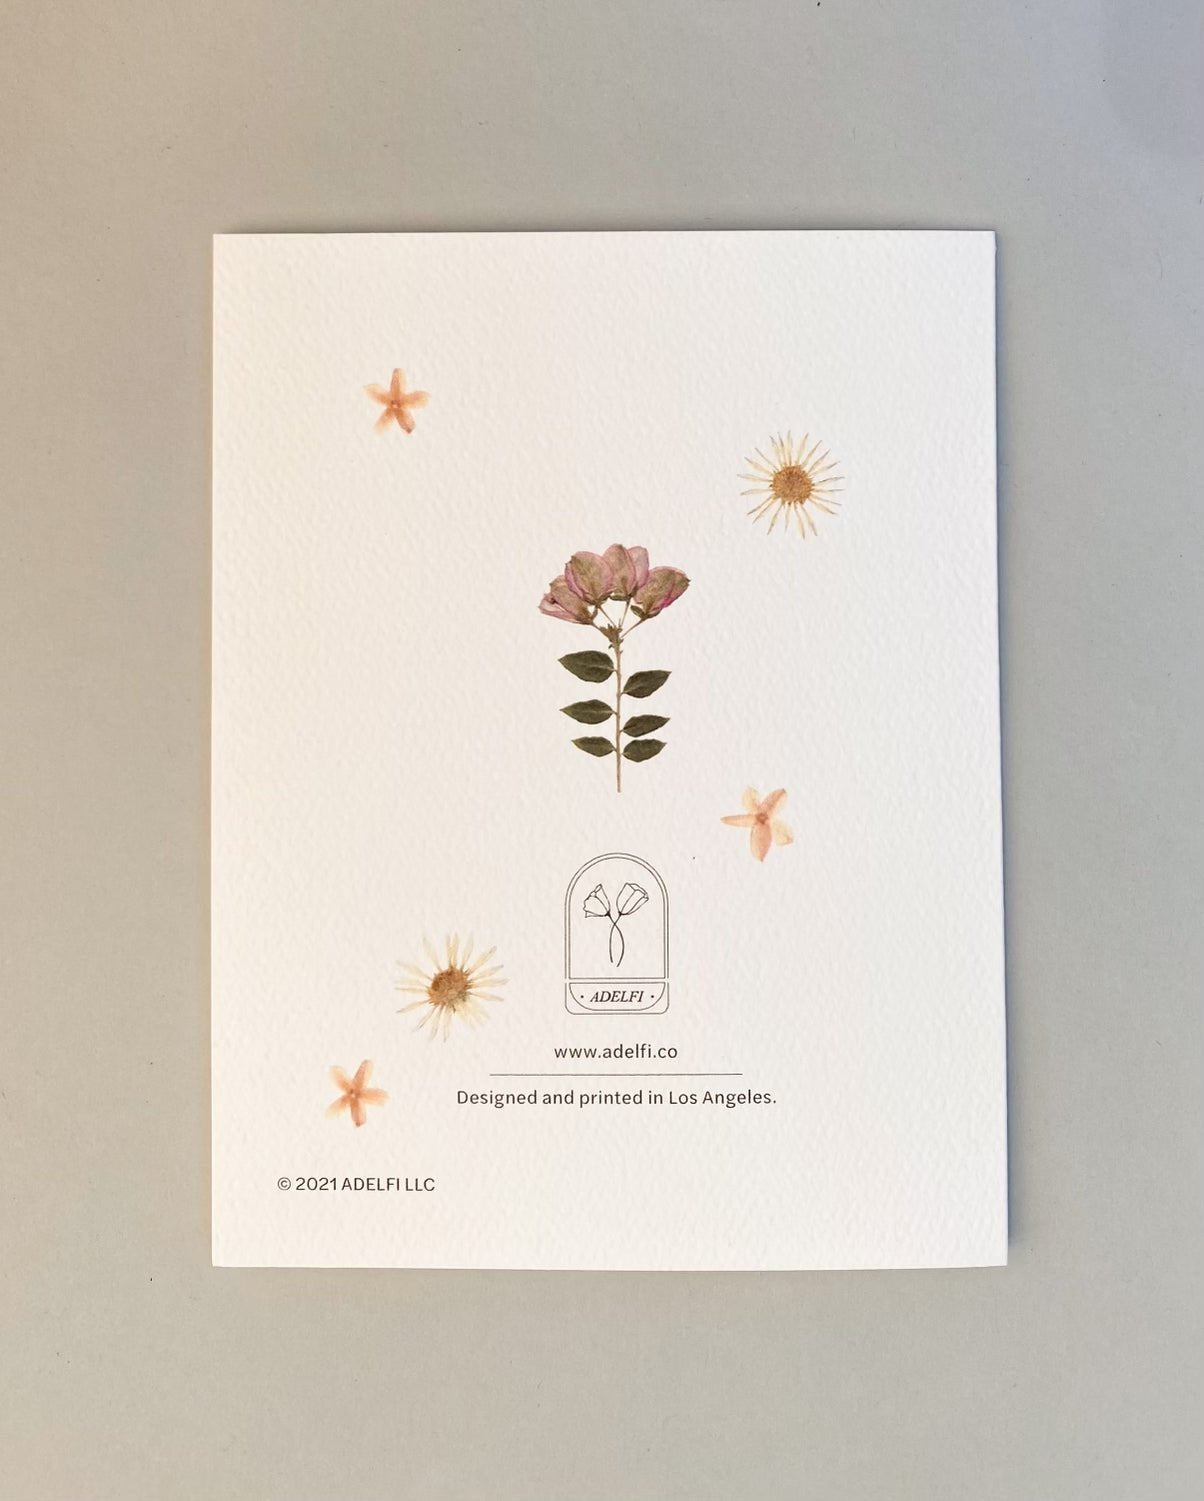 The back of the Adelfi &quot;Congratulations&quot; card with the brand logo and a few scattered pressed flowers.